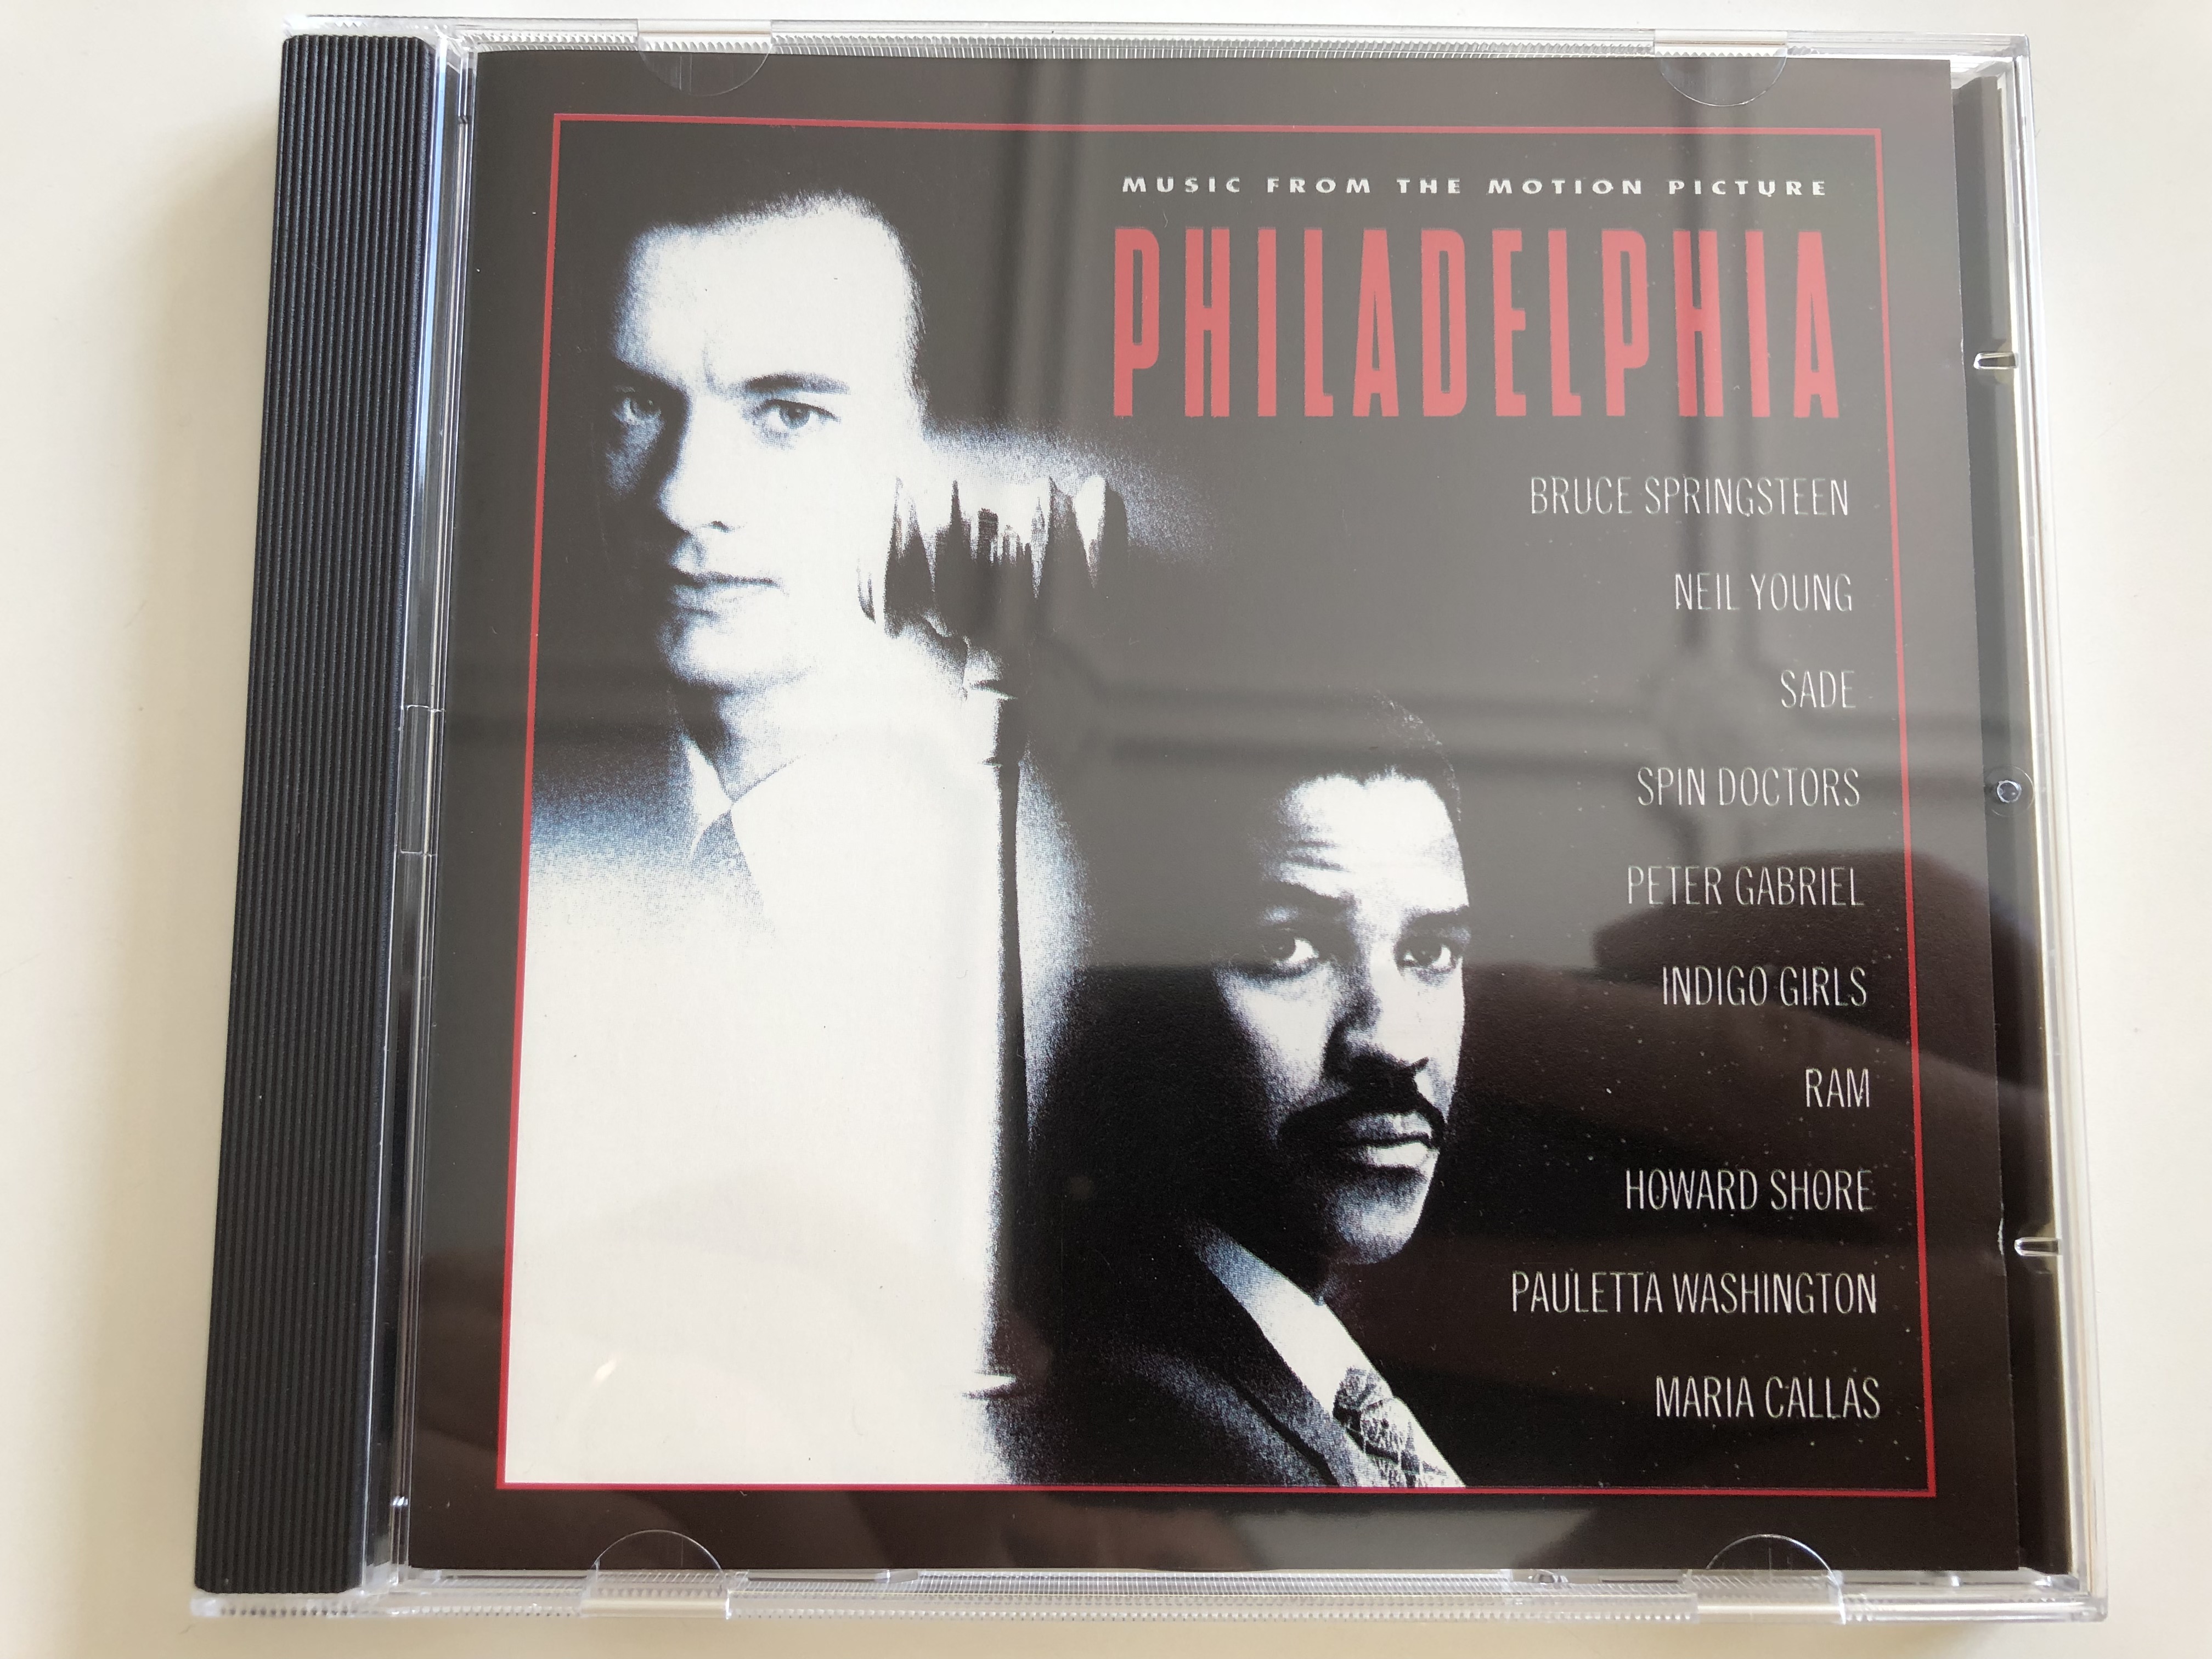 philadelphia-music-from-the-motion-picture-bruce-springsteen-neil-young-sade-peter-gabriel-maria-callas-audio-cd-1993-epc-474998-2-1-.jpg